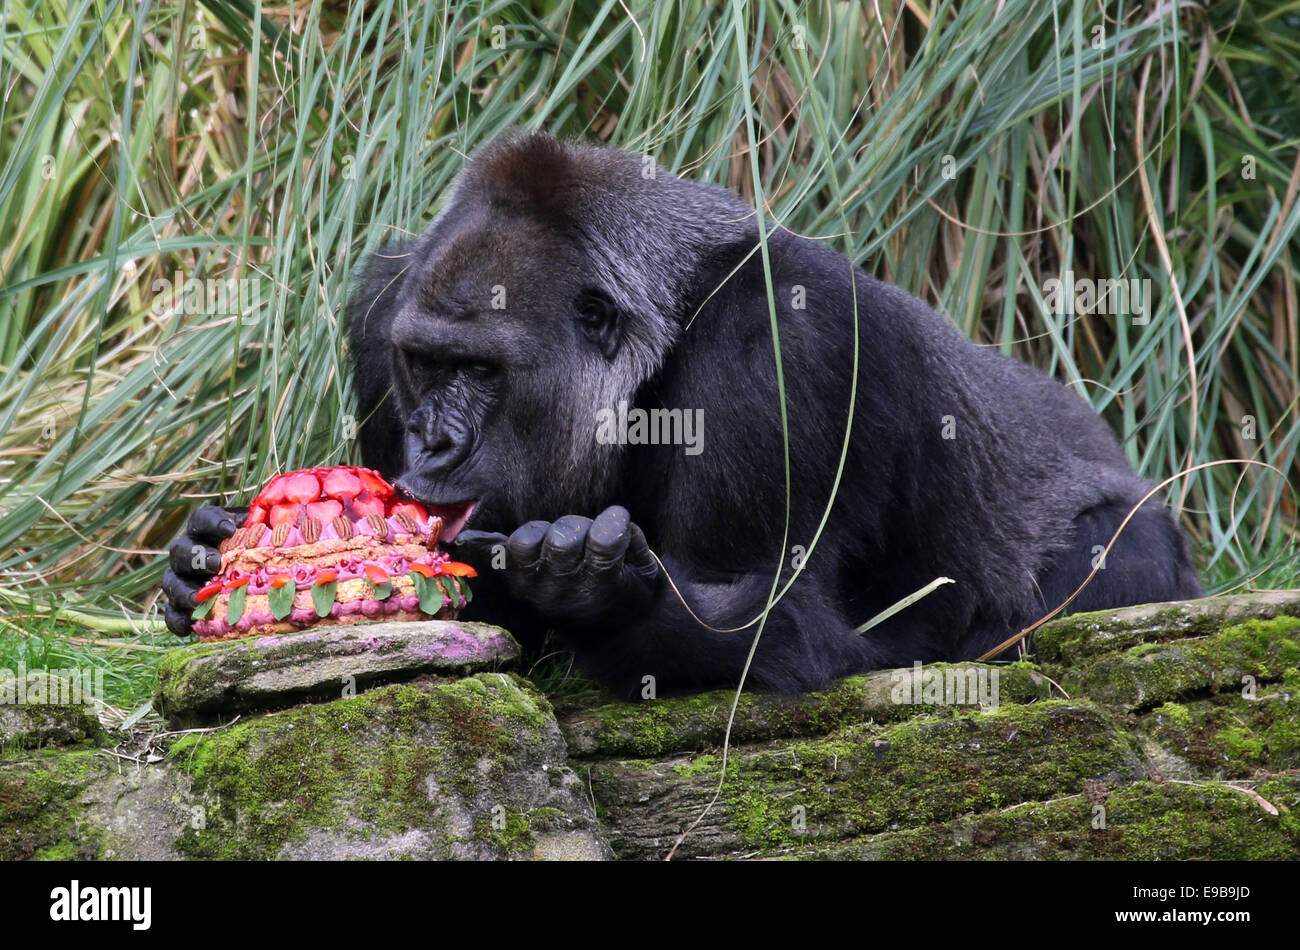 London, UK. 23rd October, 2014. London Zoo's oldest female gorilla Zaire enjoys her birthday cake at London Zoo in London, Britain, on Oct. 23, 2014. Runner-up on this year's Great British Bake Off, Richard Burr created special birthday cake for Zaire to celebrate her 40th birthday, including sugar-free jelly, apples, carrots and walnuts, in her favorite pink colour. Zaire was born in the 1974 and arrived in London in 1984. Credit:  Xinhua/Alamy Live News Stock Photo